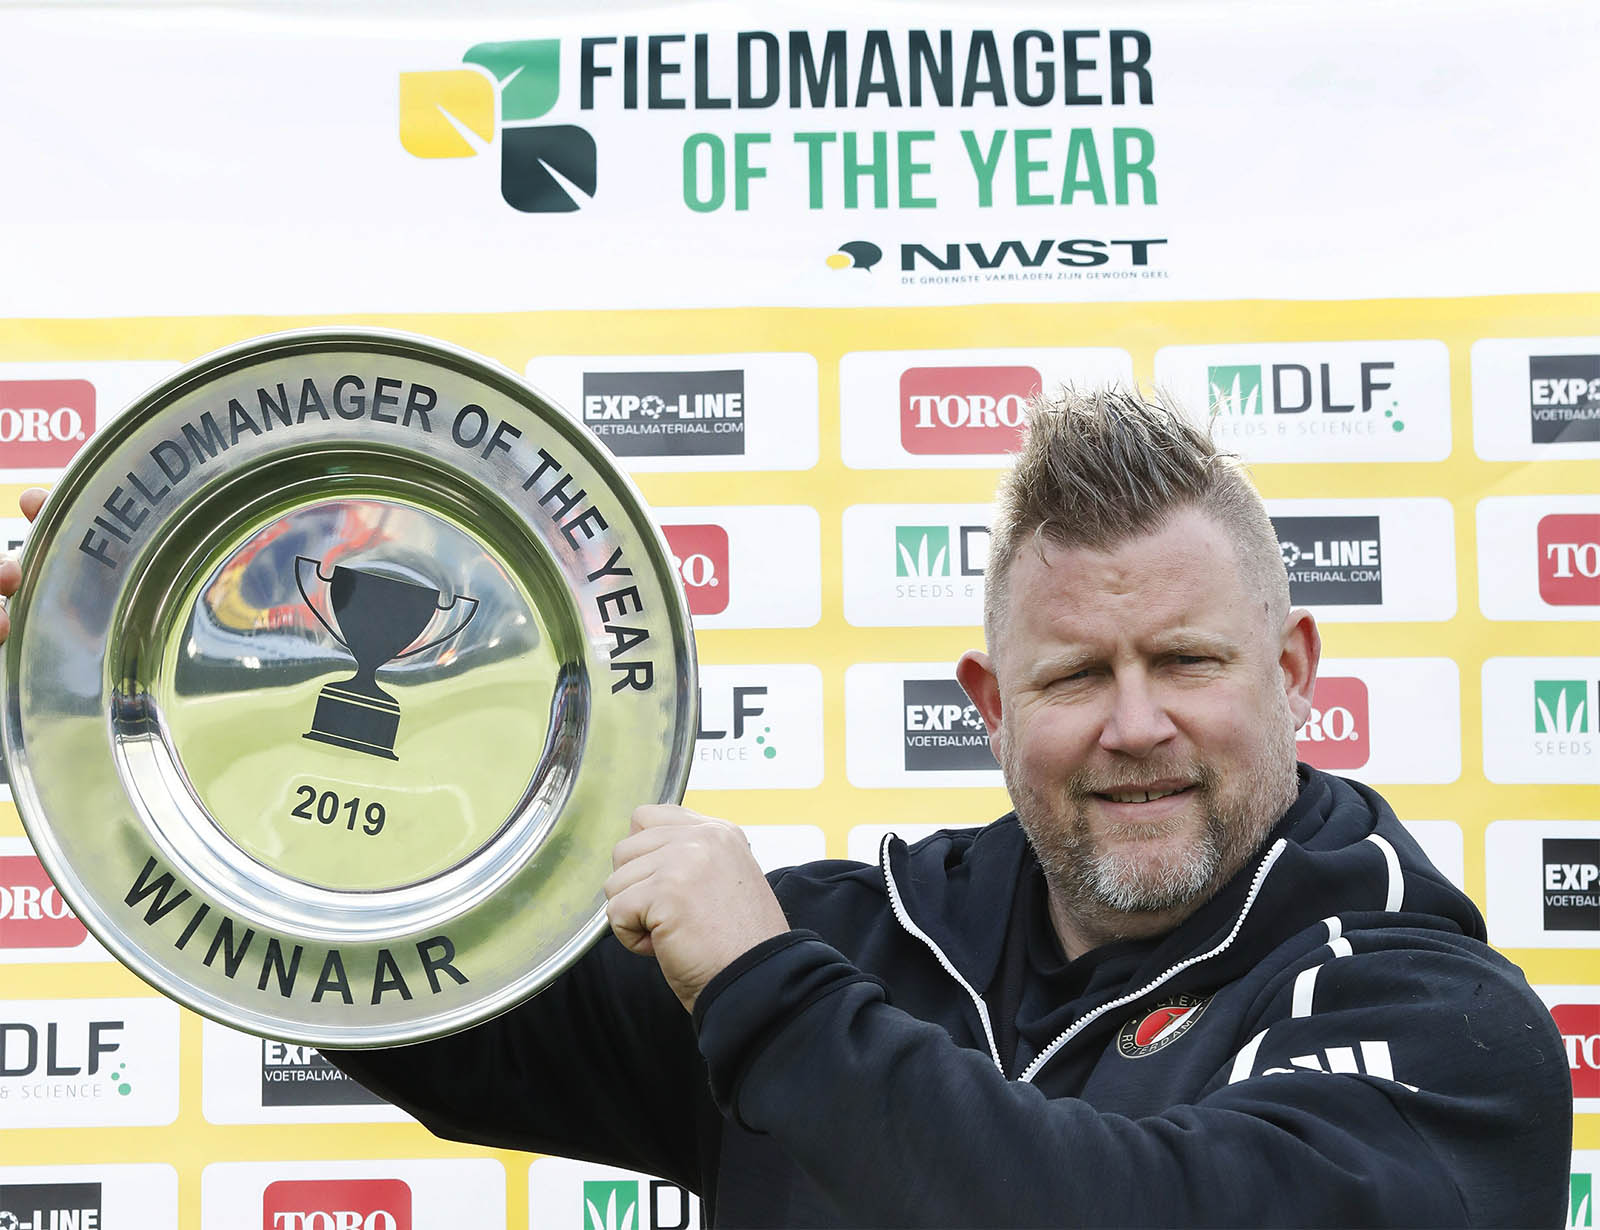 Fieldmanager of the year 2019